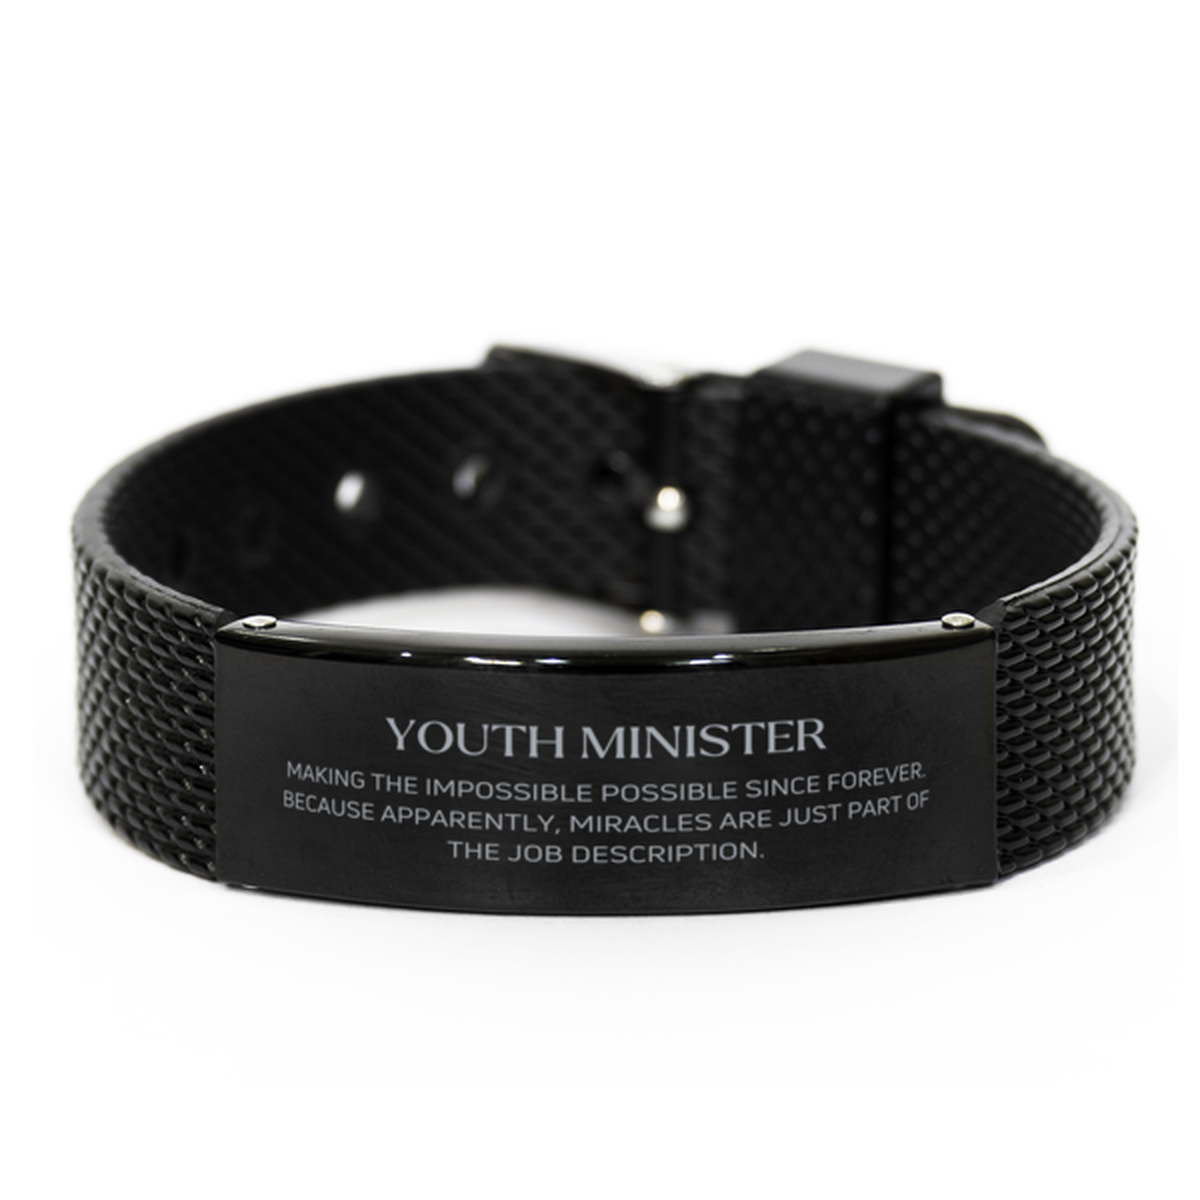 Funny Youth Minister Gifts, Miracles are just part of the job description, Inspirational Birthday Black Shark Mesh Bracelet For Youth Minister, Men, Women, Coworkers, Friends, Boss